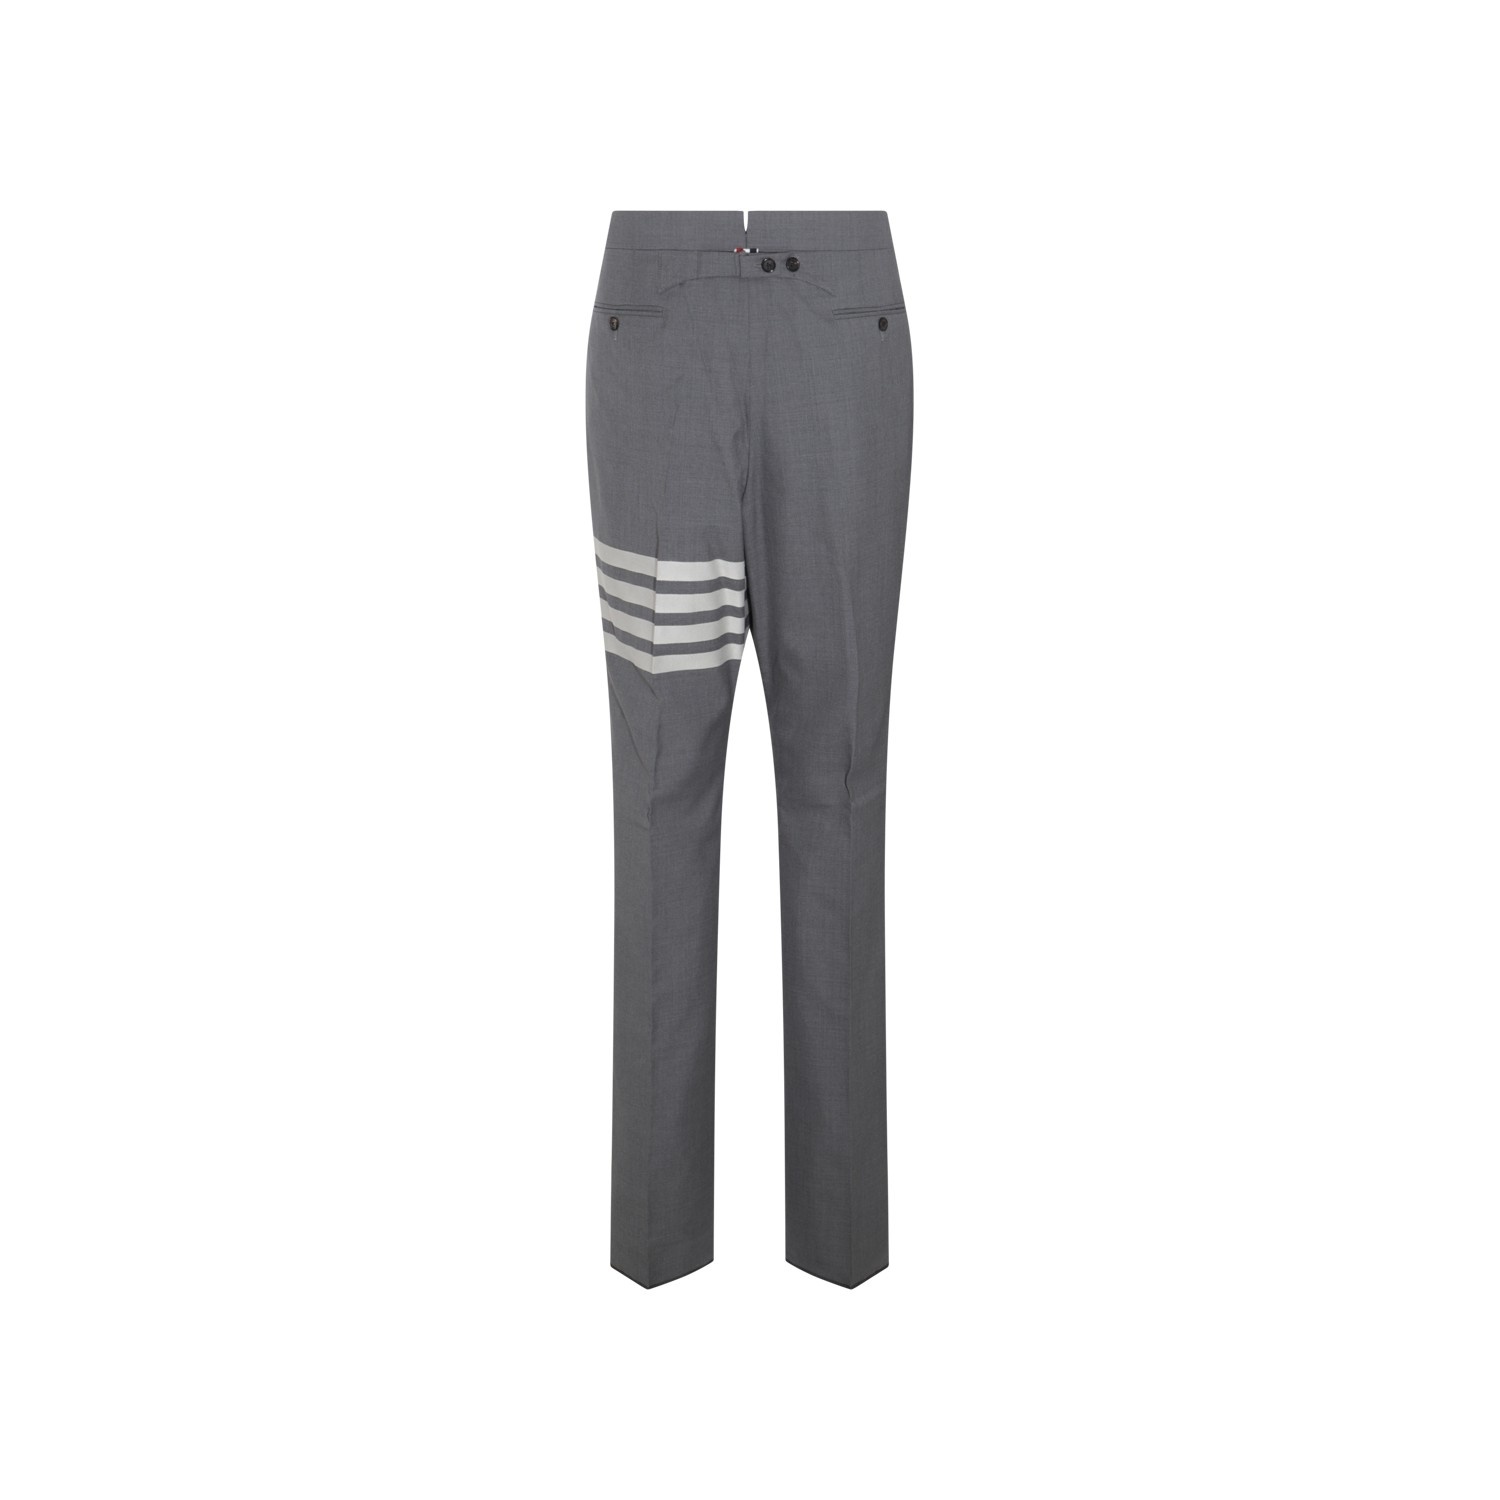 GREY AND WHITE WOOL TROUSERS - 2